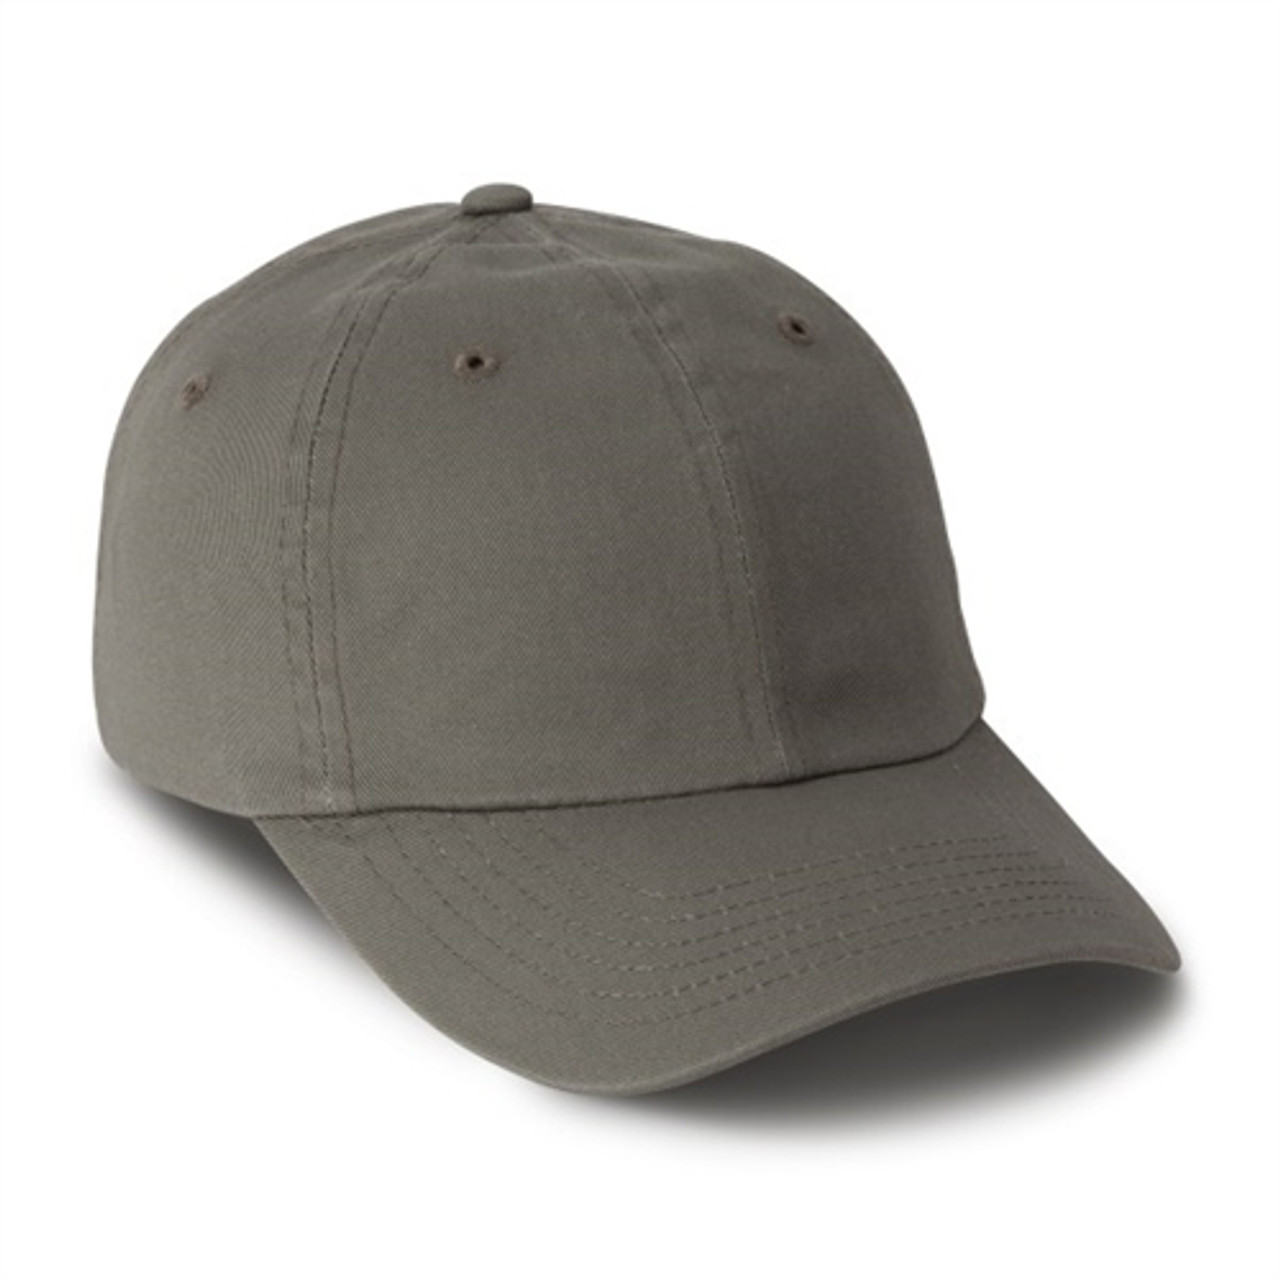 Custom The Original Imperial Unstructured Cotton Twill Hat